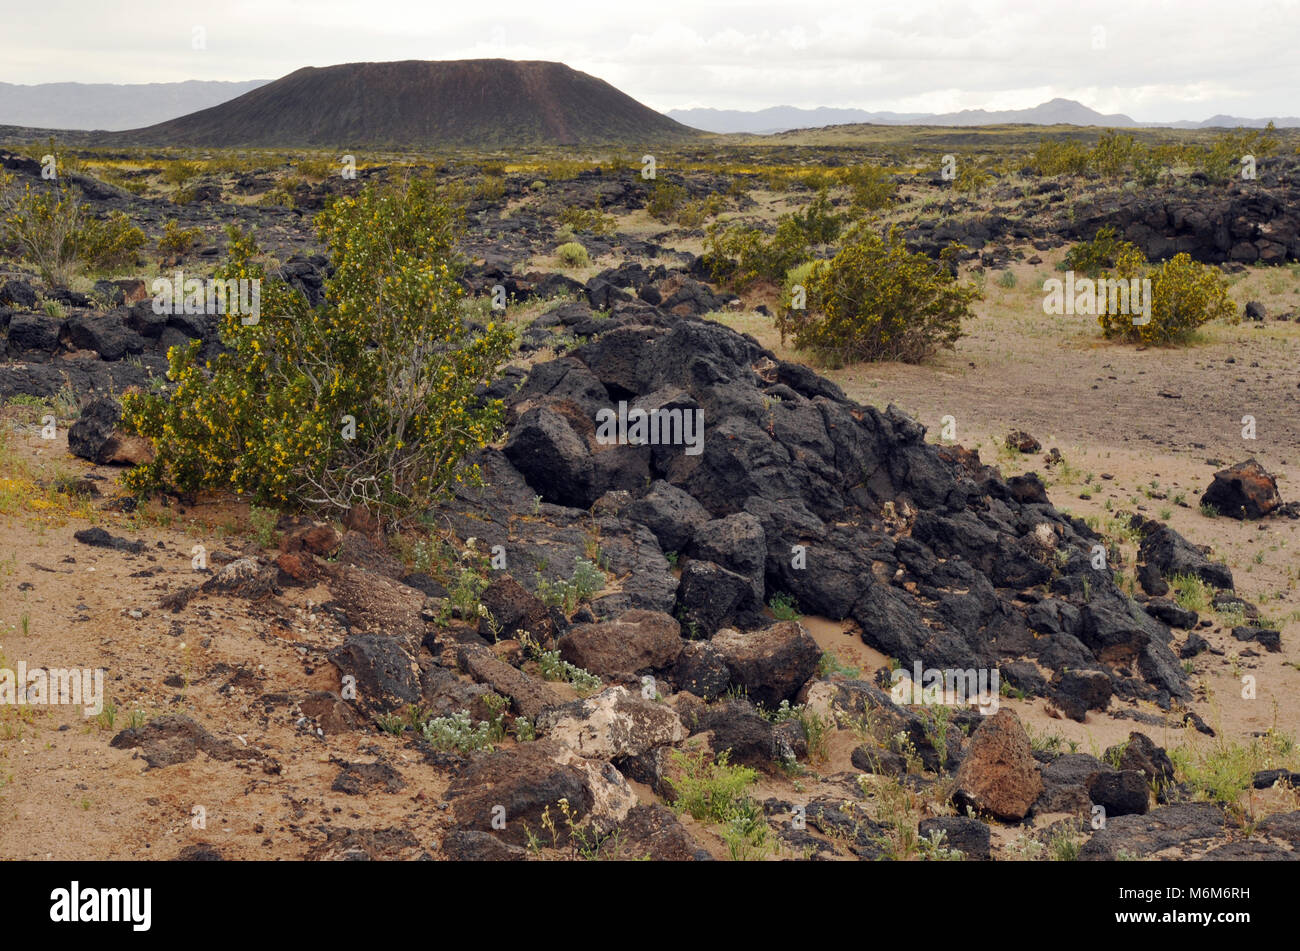 An ancient lava field extends across the Mojave Desert from the Amboy Crater near the town of Amboy, CA. The crater is an extinct cinder cone volcano. Stock Photo